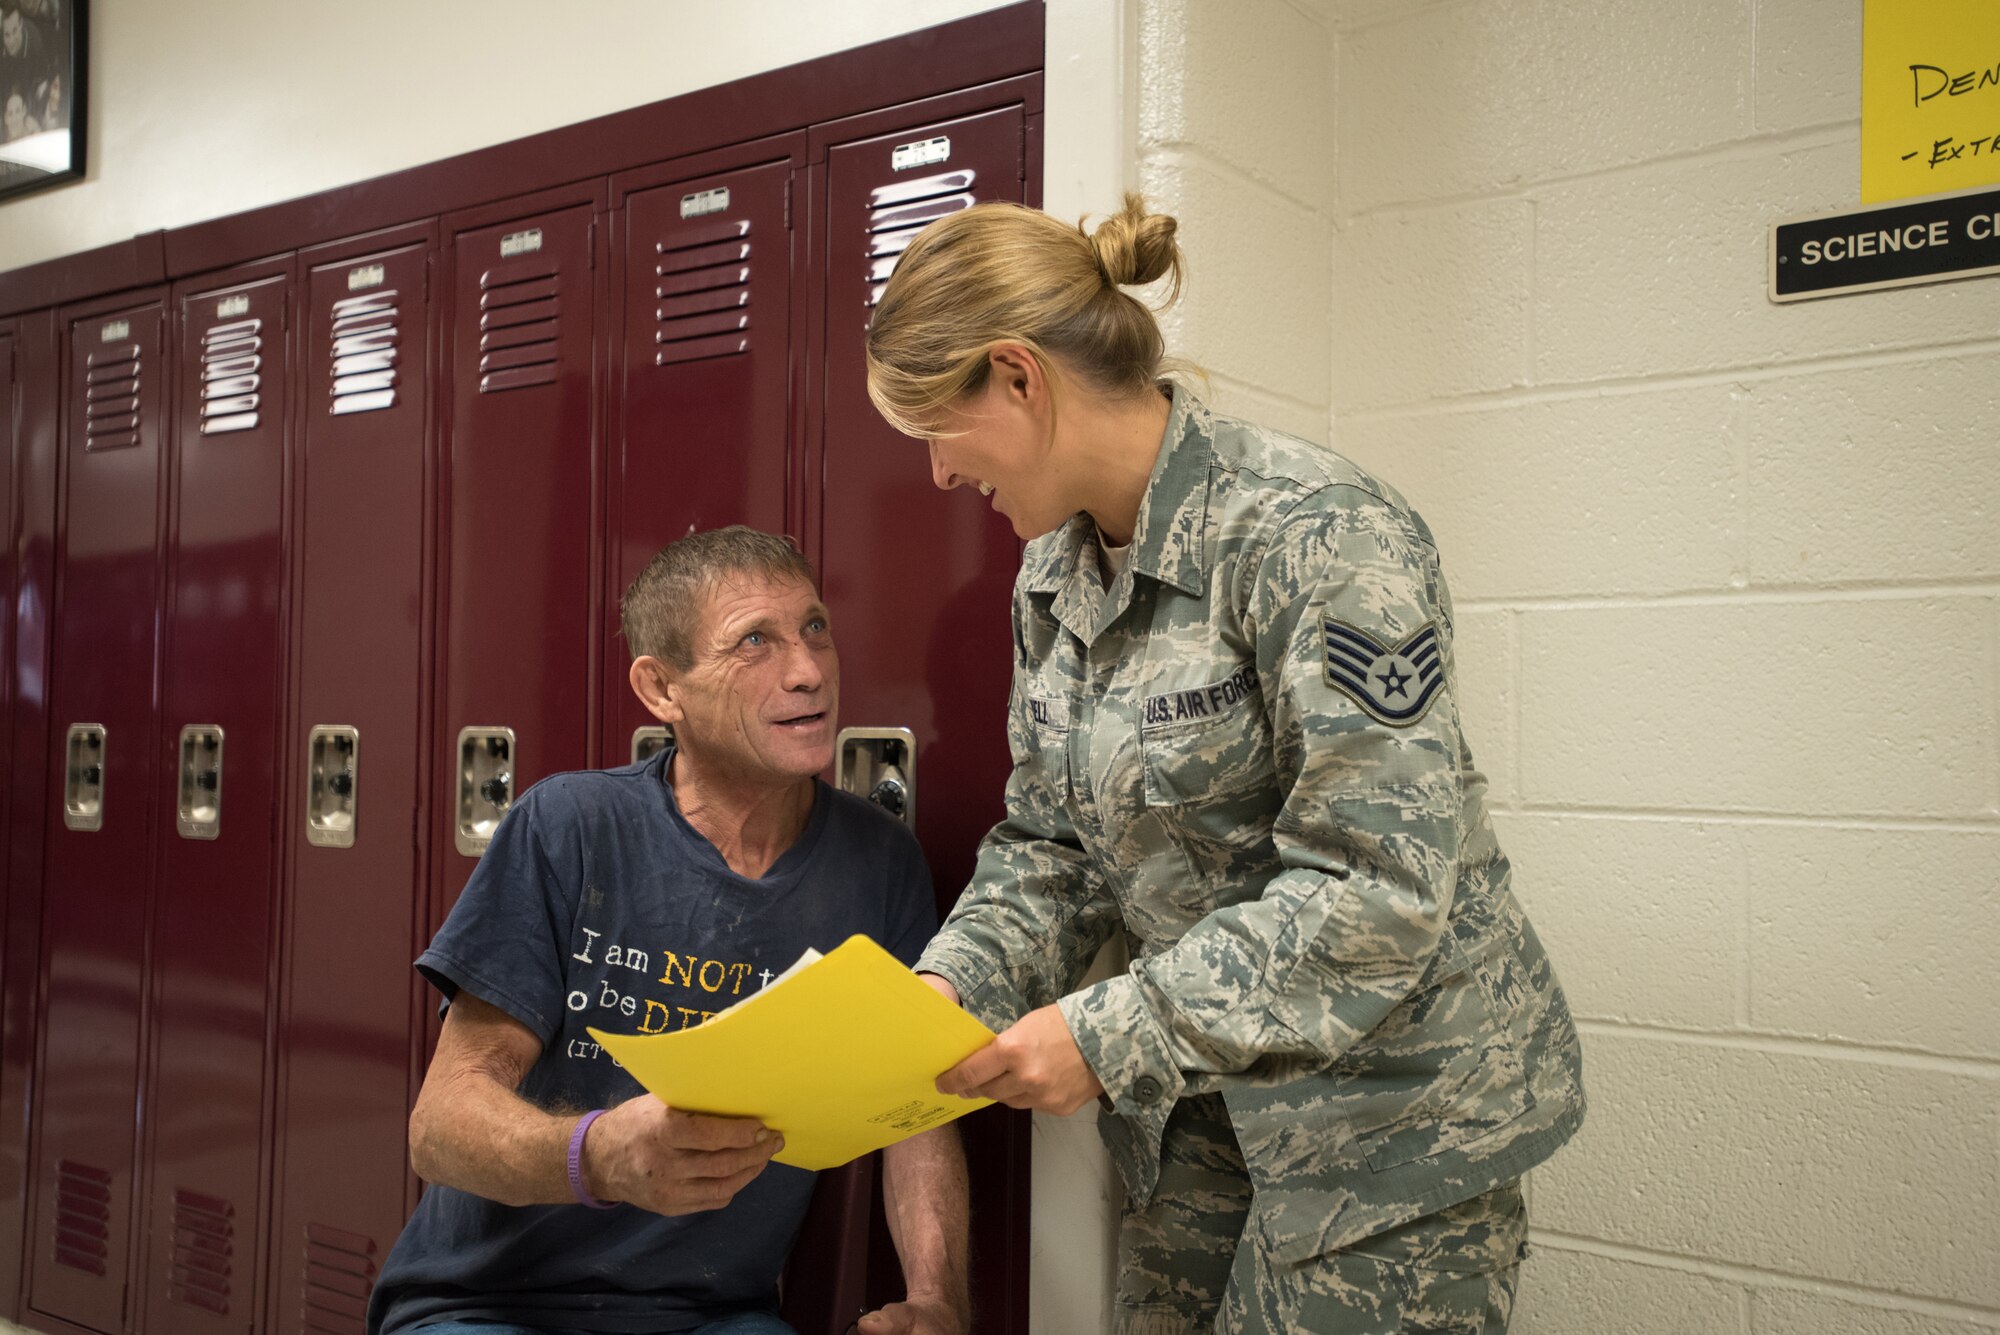 U.S. Air Force Staff Sgt. Katy Jewell (right), a medical technician from the Kentucky Air National Guard’s 123rd Medical Group Detachment 1, processes paperwork for a dental examination from Western Kentucky resident Troy Burgess at Carlisle County High School in Bardwell, Ky., July 23, 2016, during Bluegrass Medical Innovative Readiness Training. The Kentucky Air National Guard, U.S. Navy Reserve and other military units are teaming with the Delta Regional Authority to offer medical and dental care at no cost to residents in Mayfield and two other Western Kentucky locations from July 18 to 27 as part of the training event. (U.S. Air National Guard photo by Master Sgt. Phil Speck)